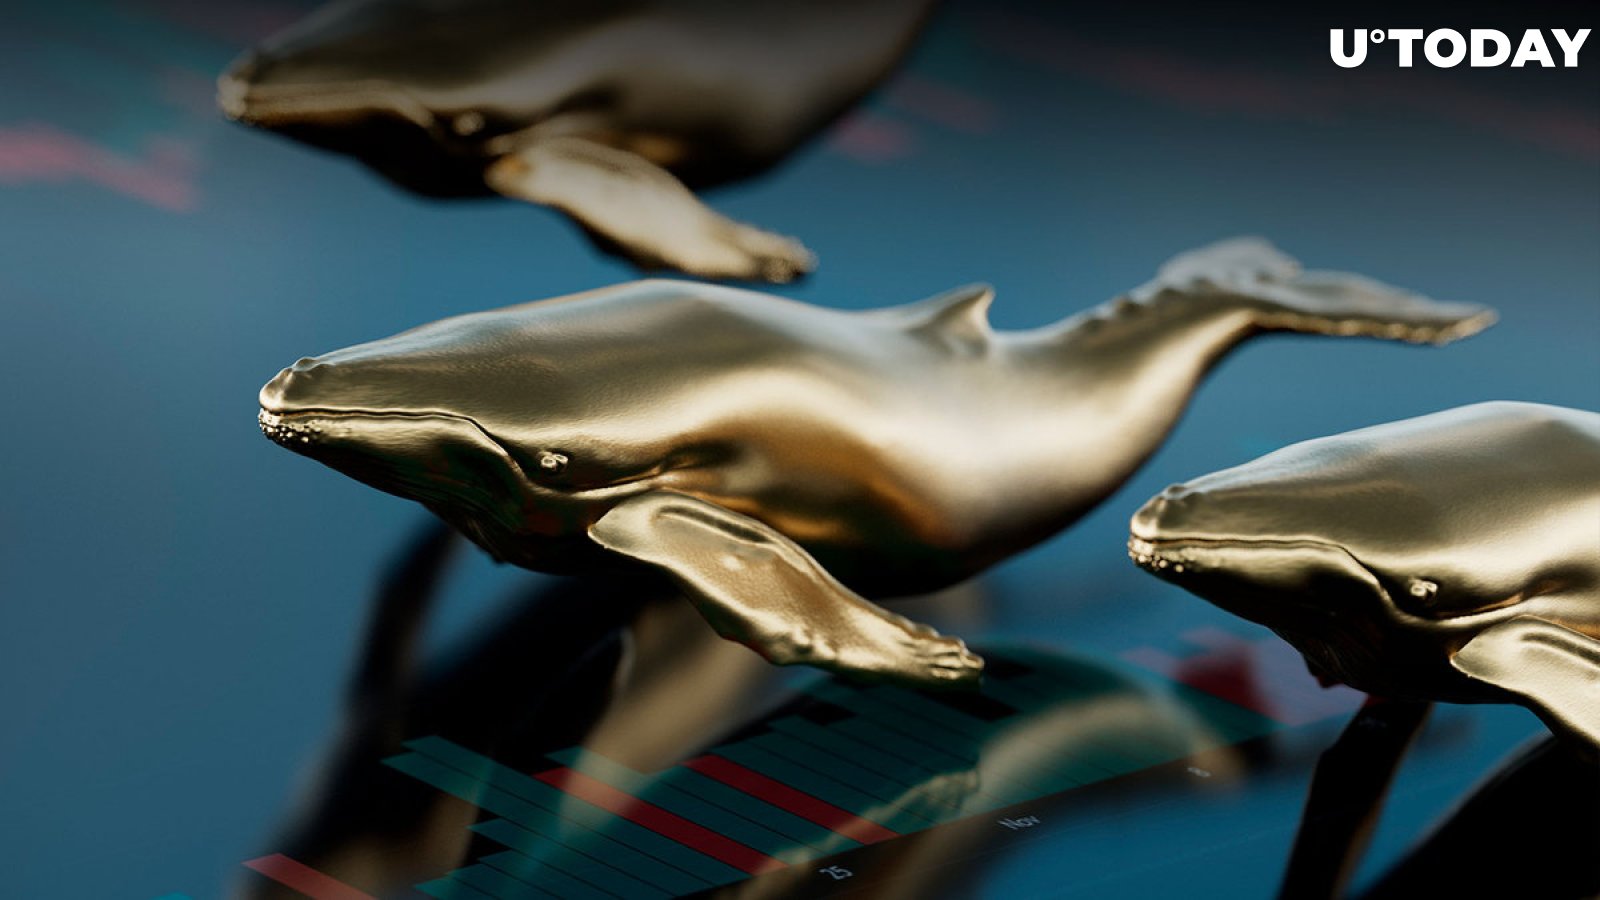 Satoshi-Era Bitcoin Whales Are Waking Up, Selling Their Holdings